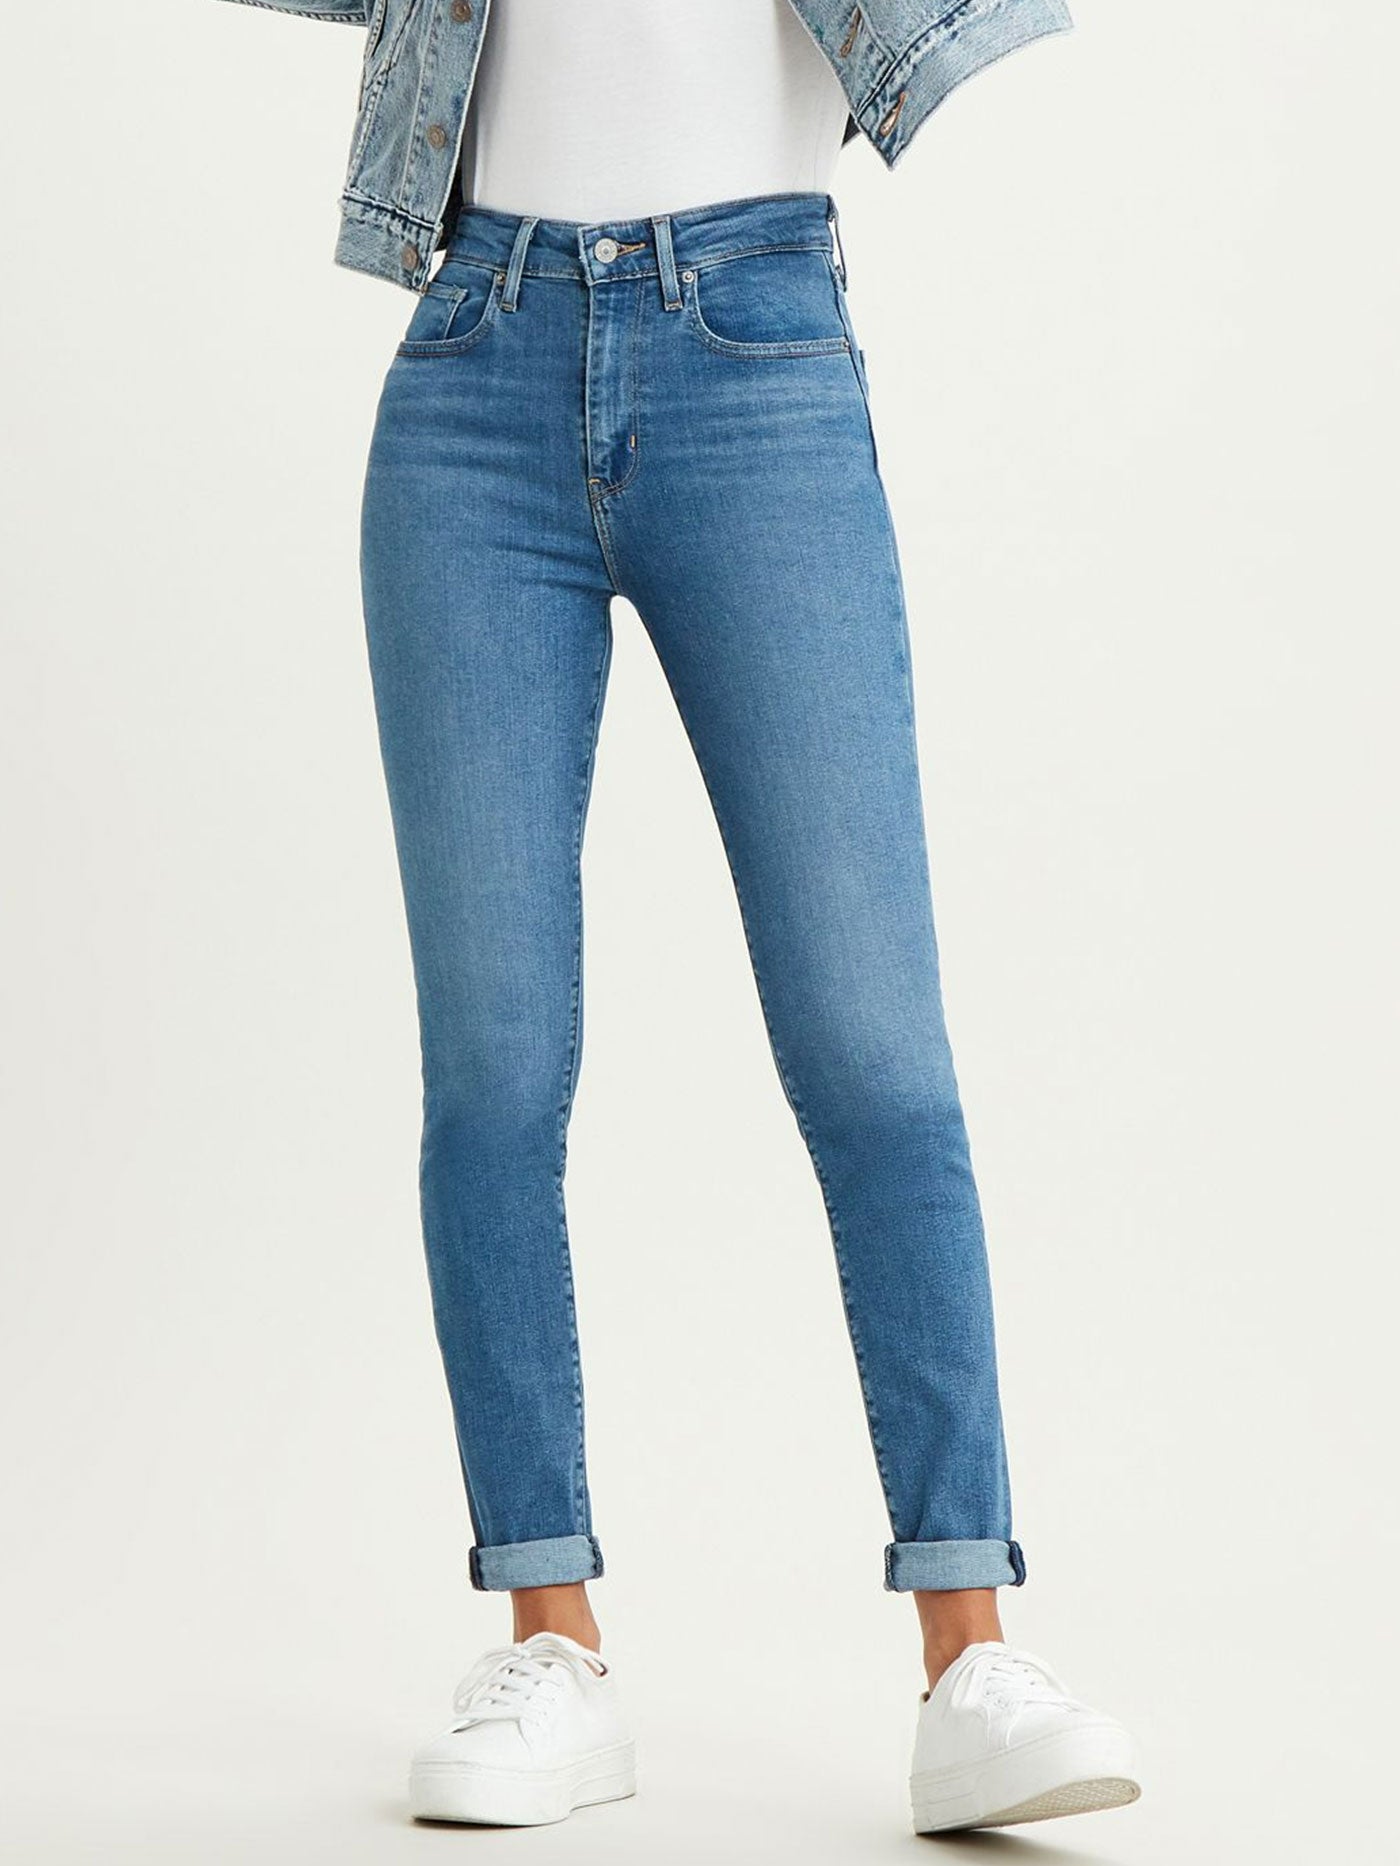 Levi's 721 High Rise Skinny Jeans | EMPIRE